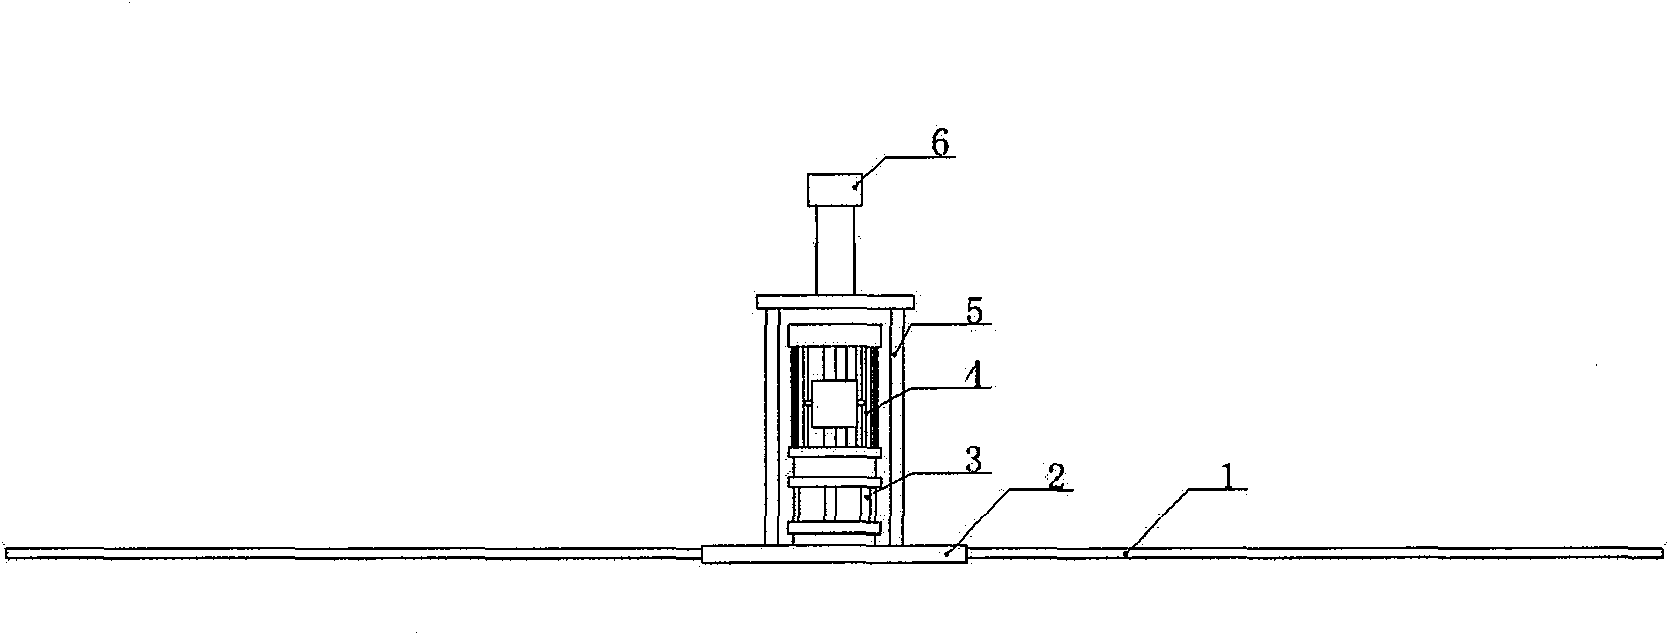 Large-size variable-frequency energy-saving fan